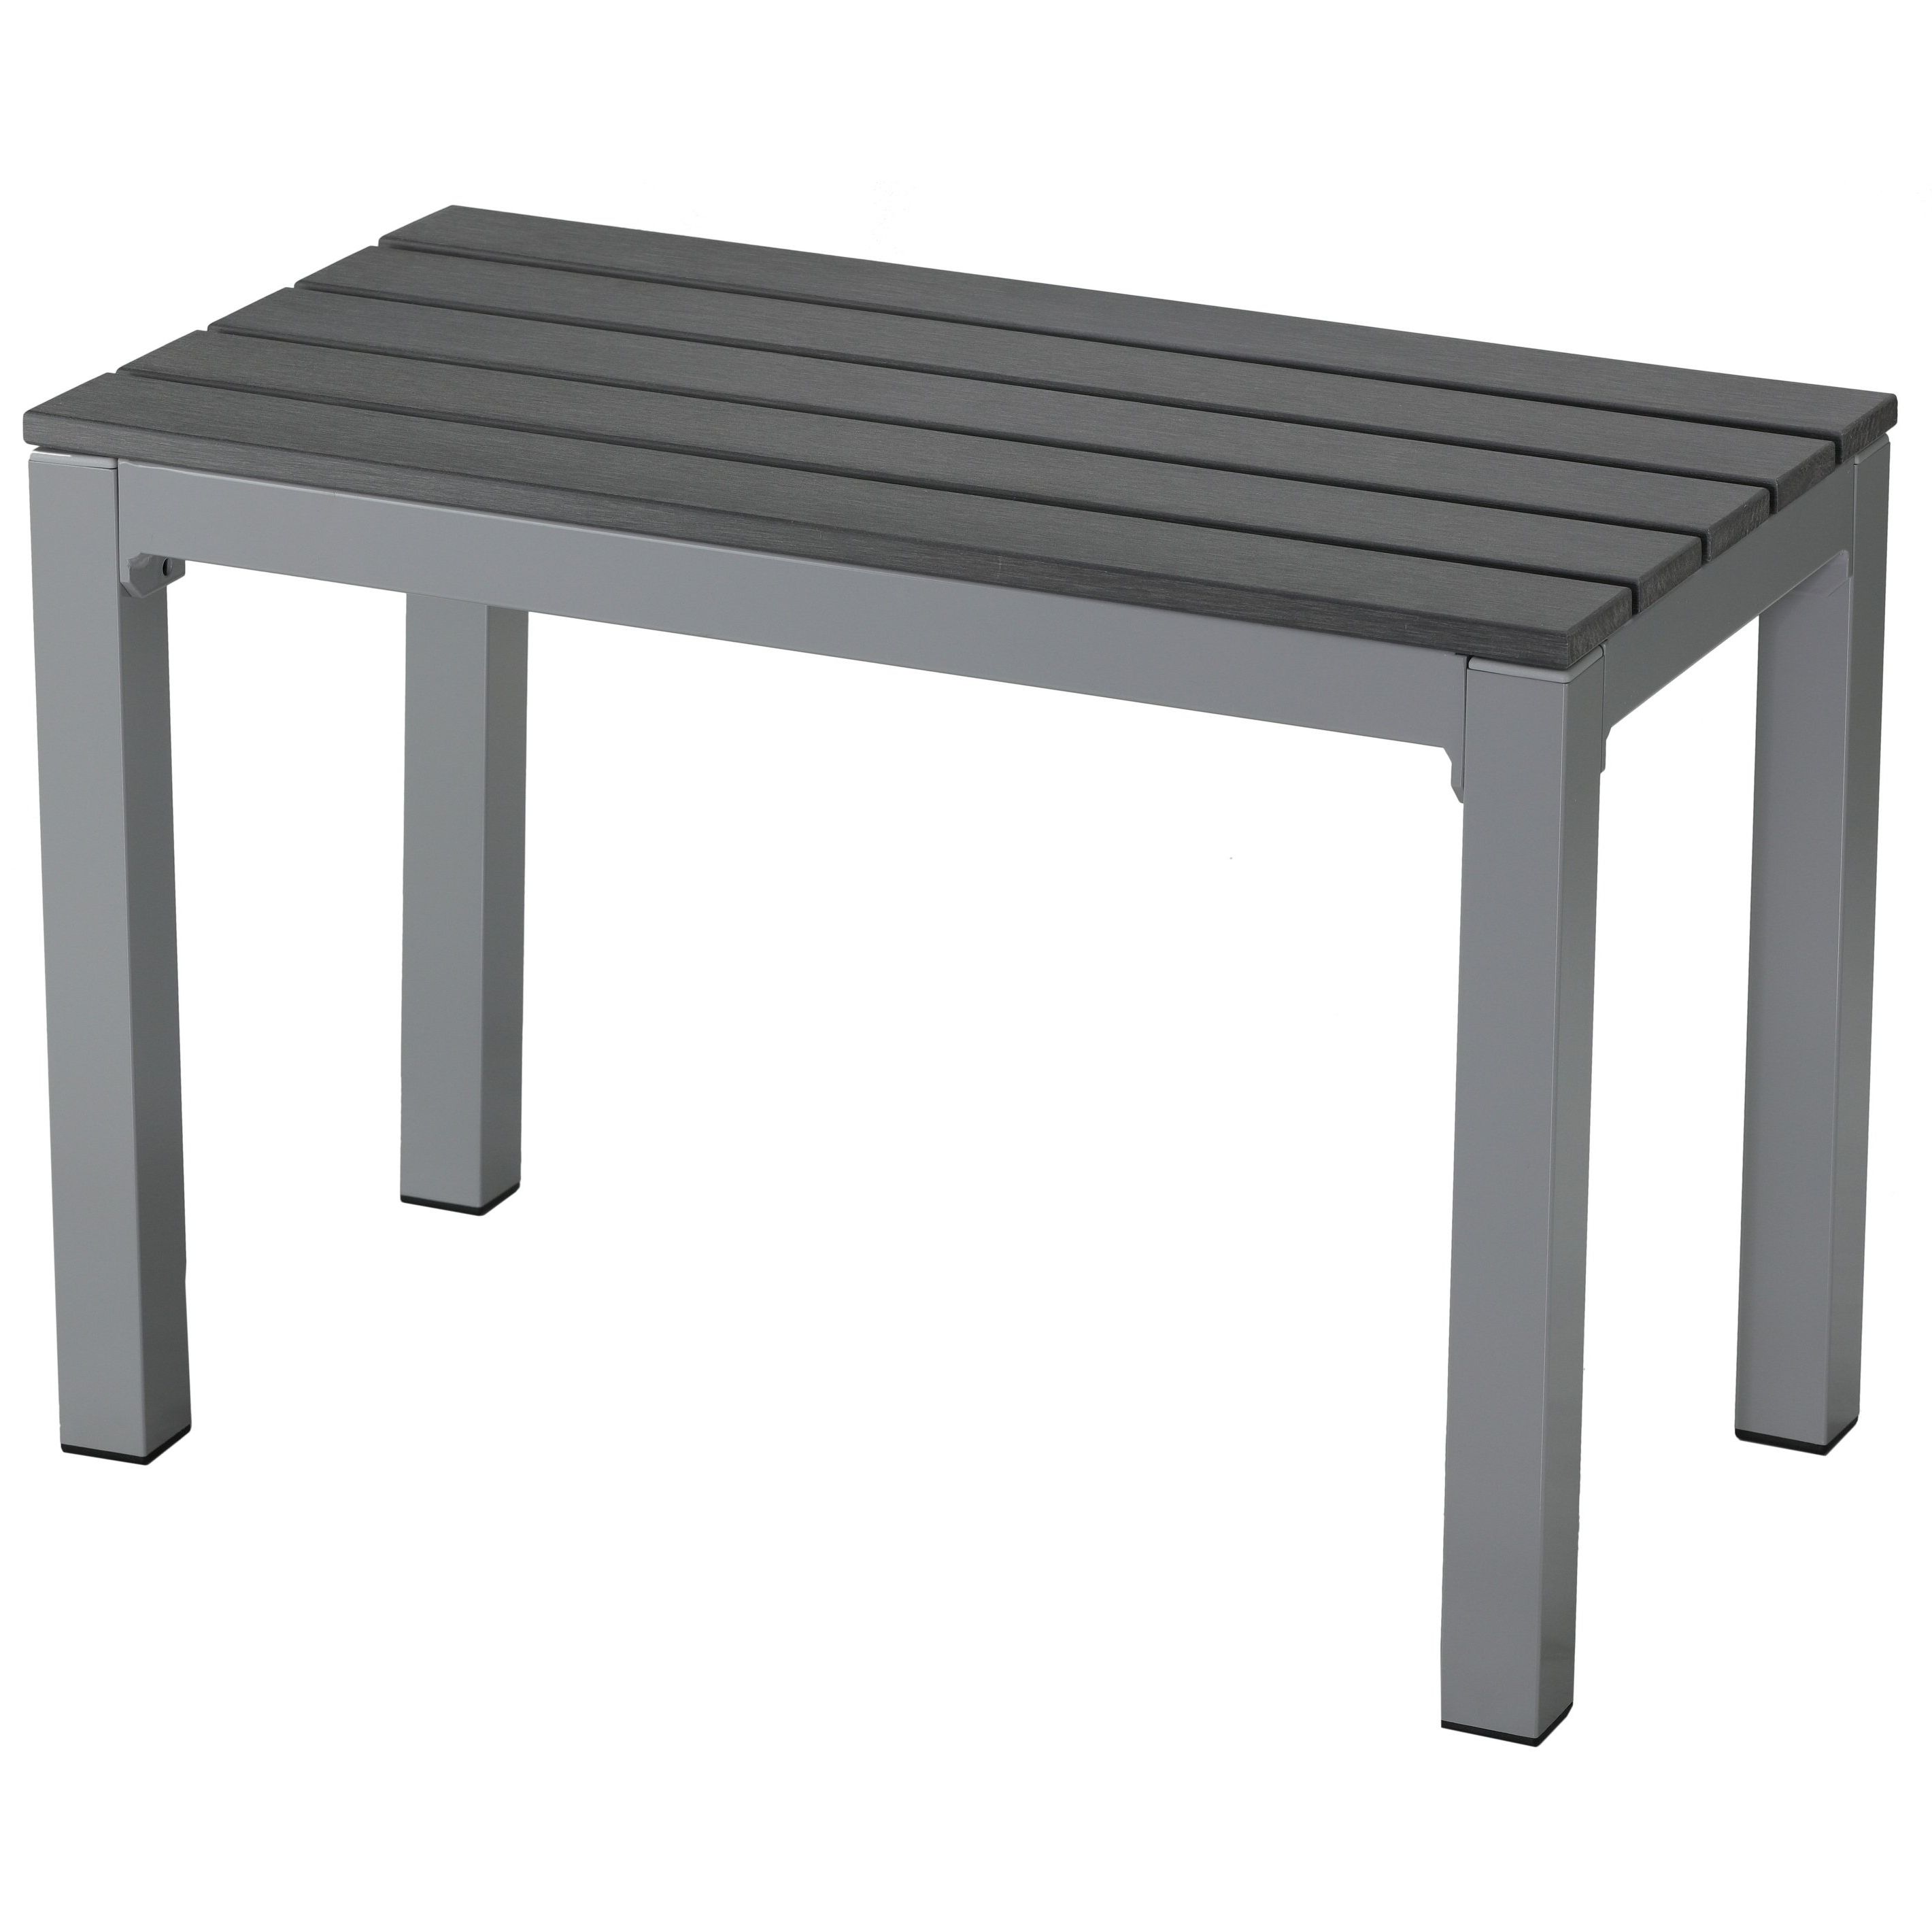 Jaxon Grey 7 Piece Rectangle Extension Dining Sets With Wood Chairs In Current Shop Jaxon Aluminum Outdoor Bench In Poly Resin, Silver/slate Grey (View 8 of 25)